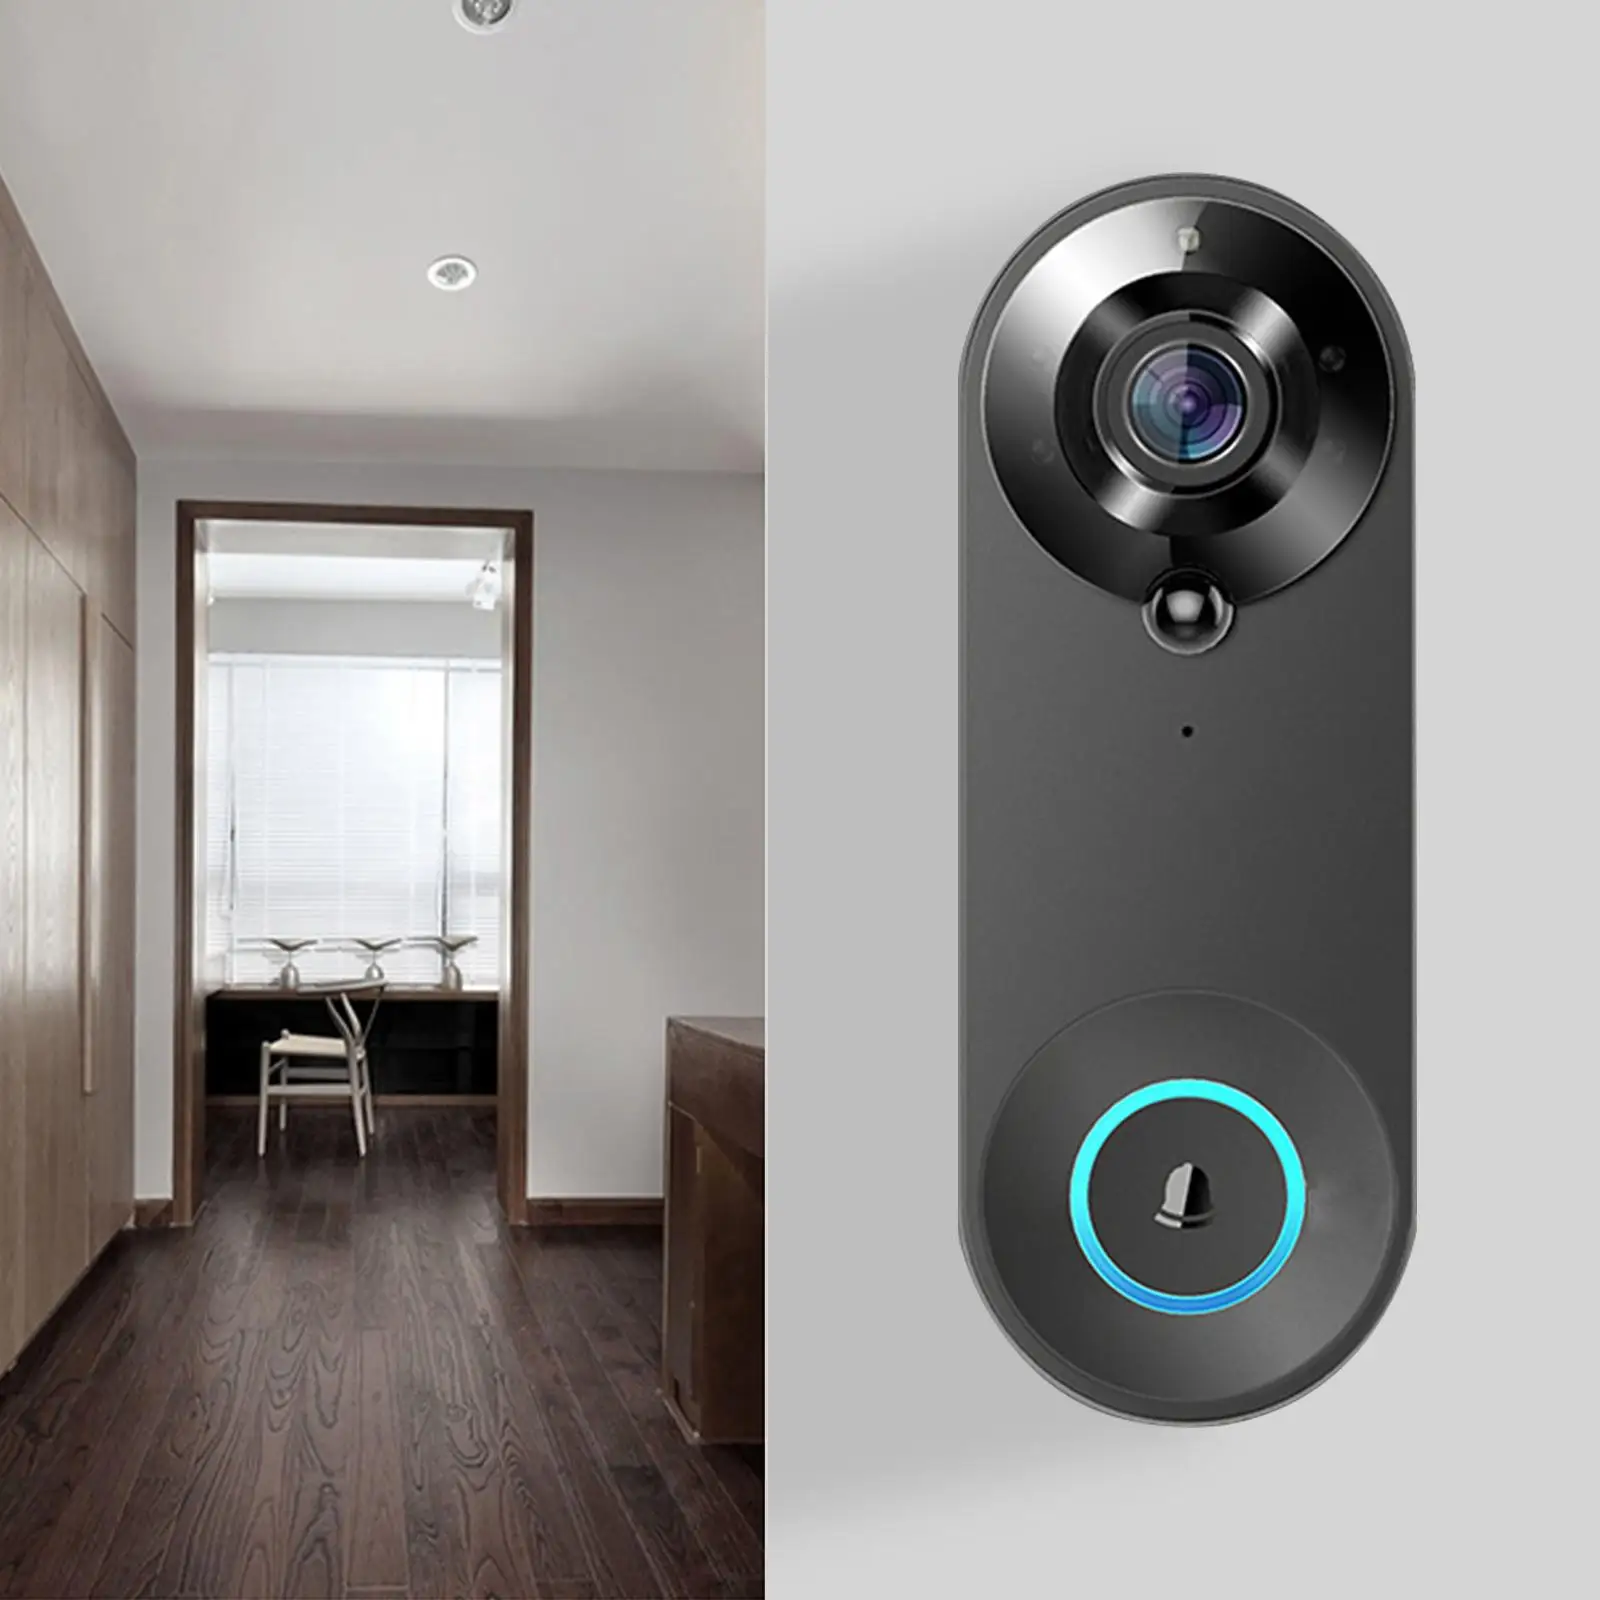 Intelligent Video Doorbell Camera Calls storage Recording, Phone for Apartments home